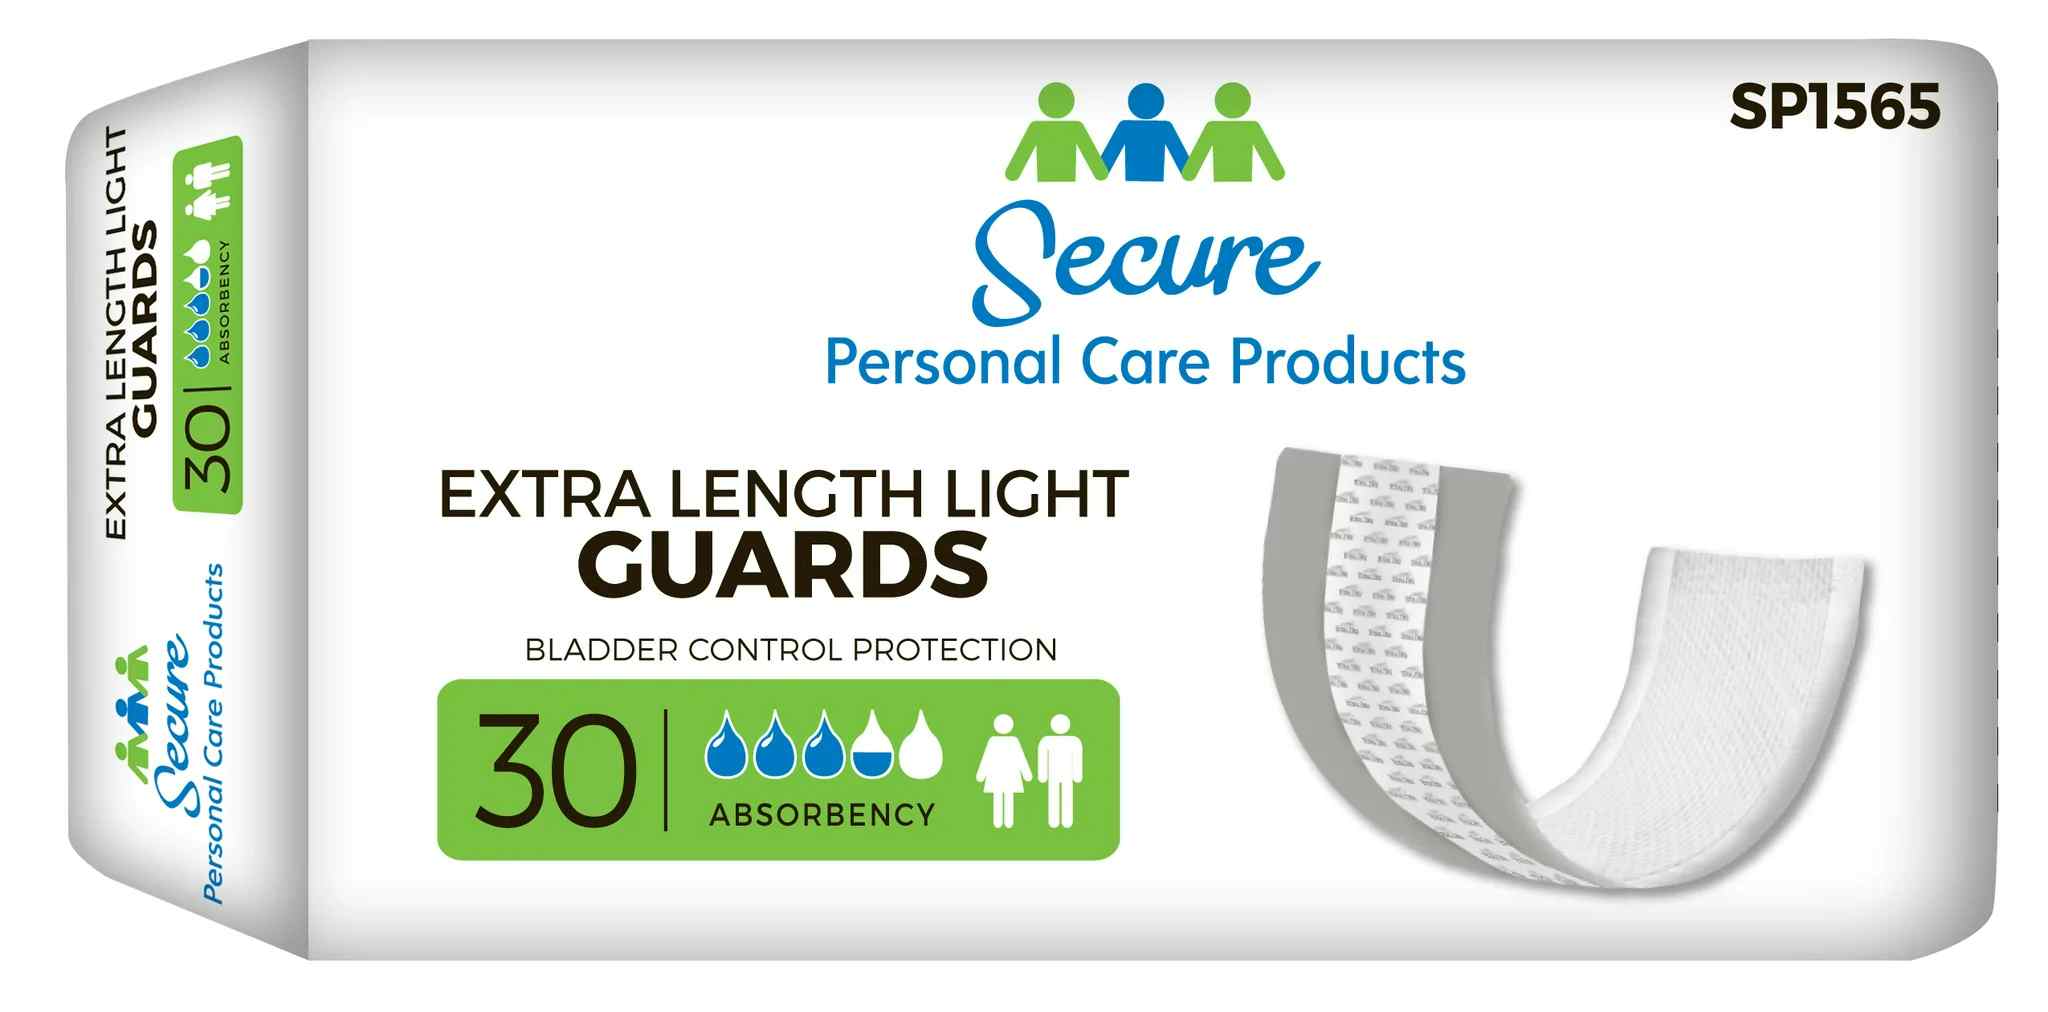 Secure Personal Care Products Extra Length Guards Bladder Control Pads, SP1565, 11" - Bag of 30